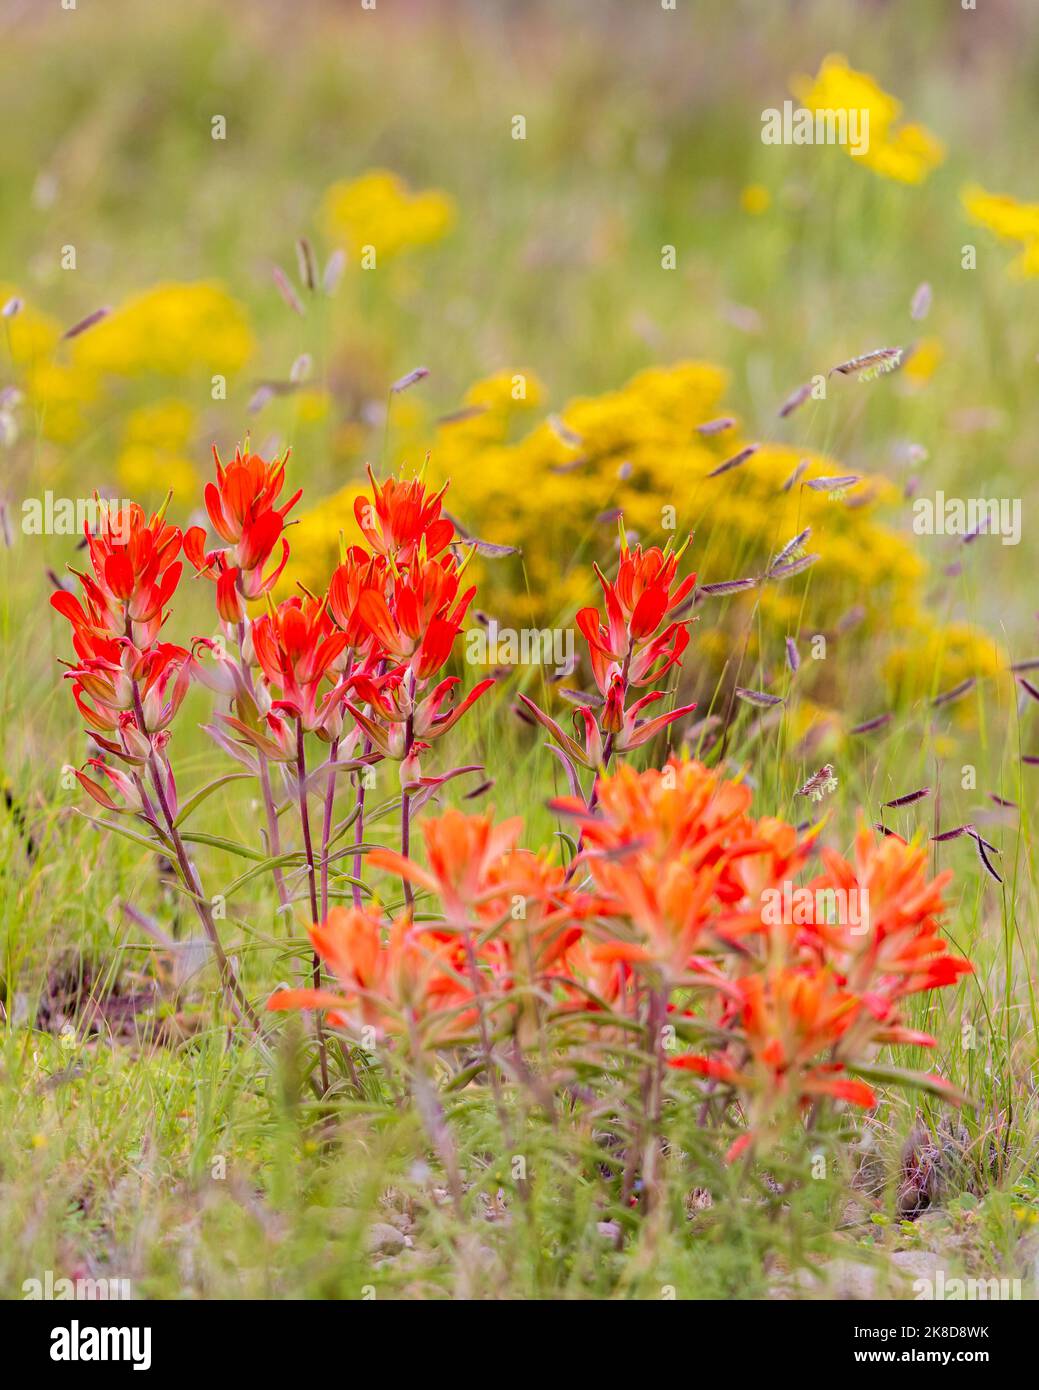 Bright red Indian paintbrush growing amidst grasses and yellow flowers. Stock Photo